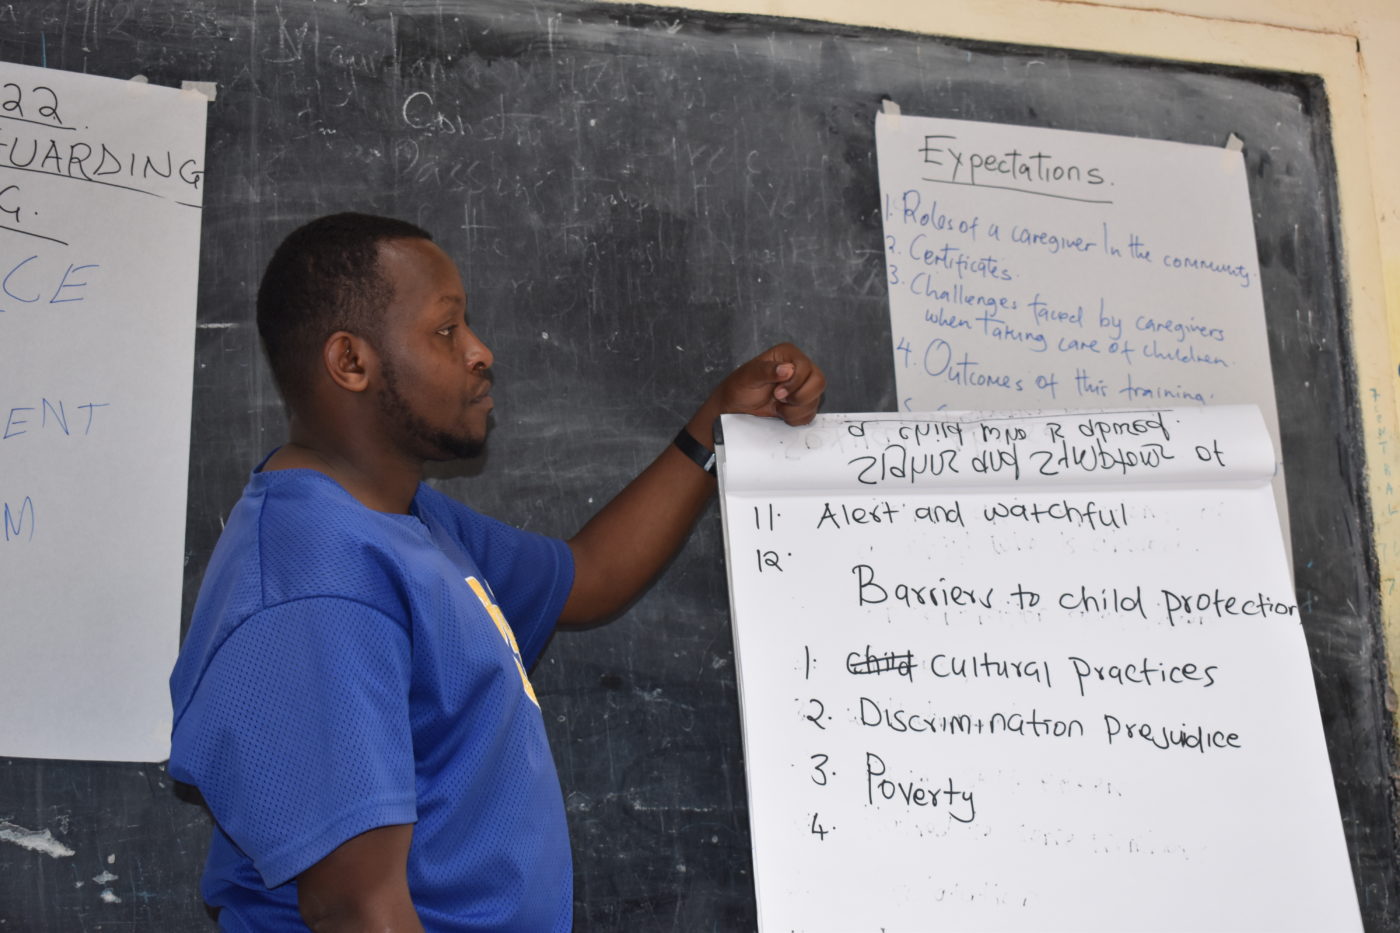 Program Story 2 - Primary school teachers empowered to prevent child abuse